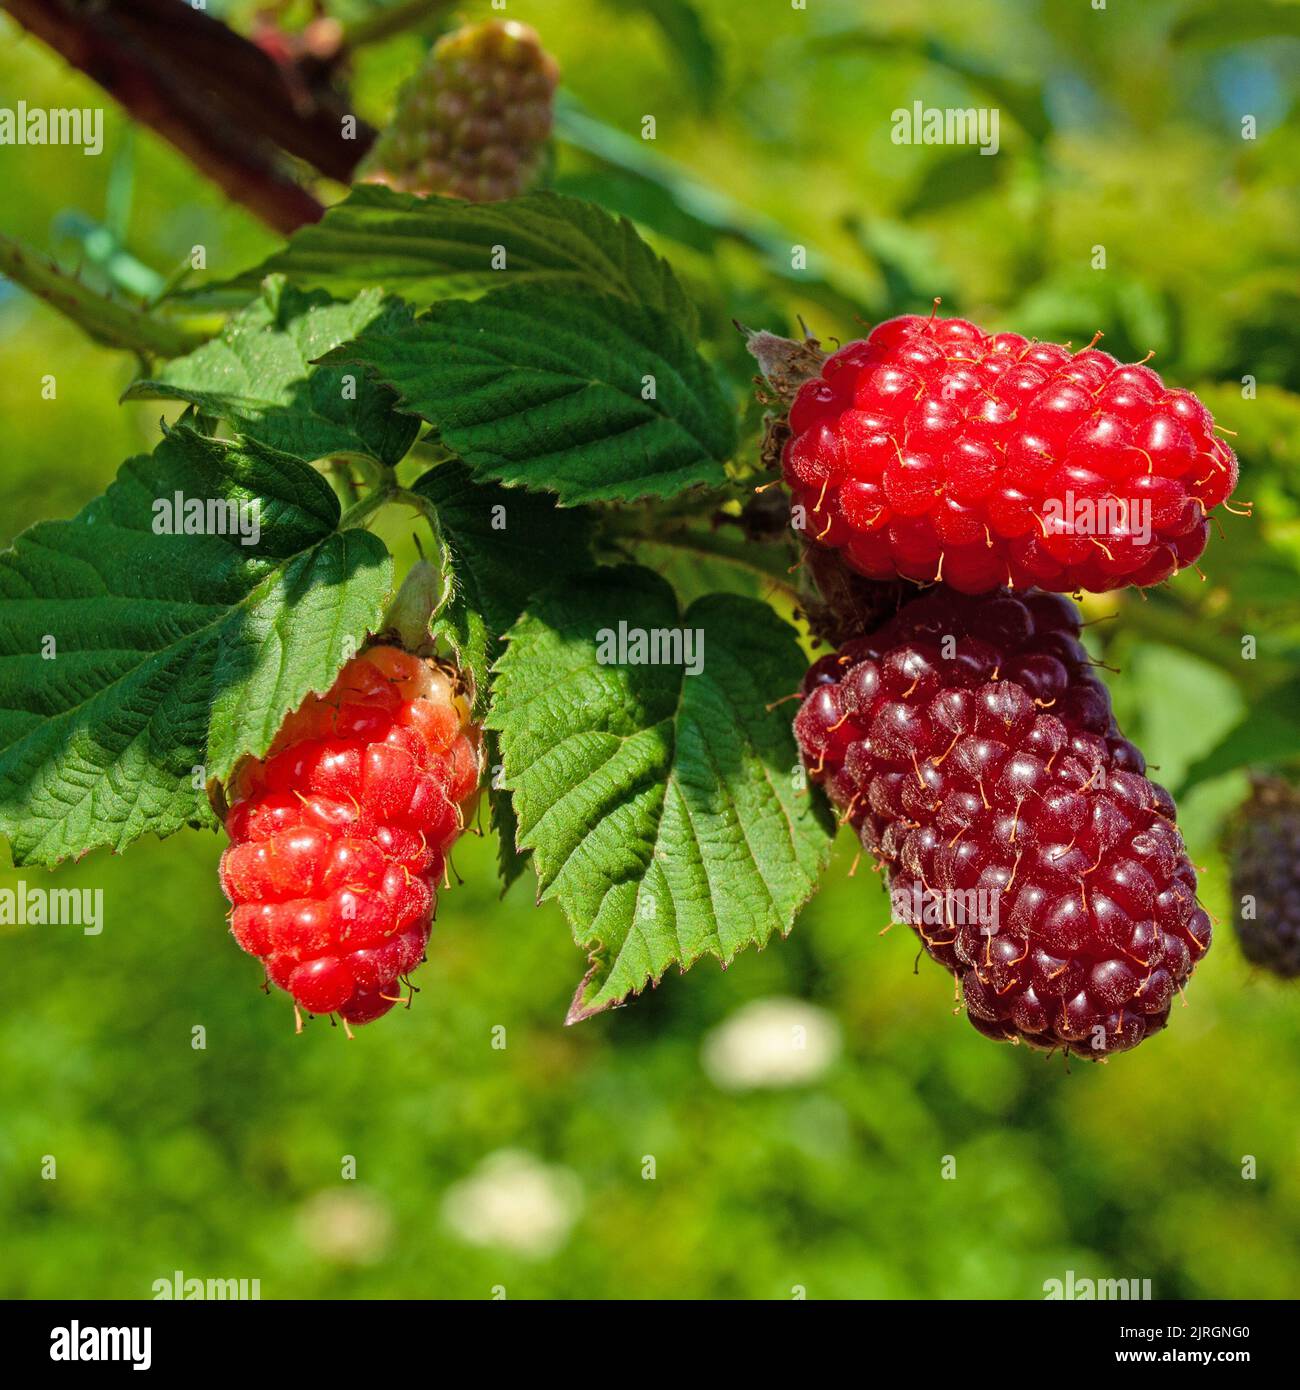 Tayberry fruits in a close-up Stock Photo